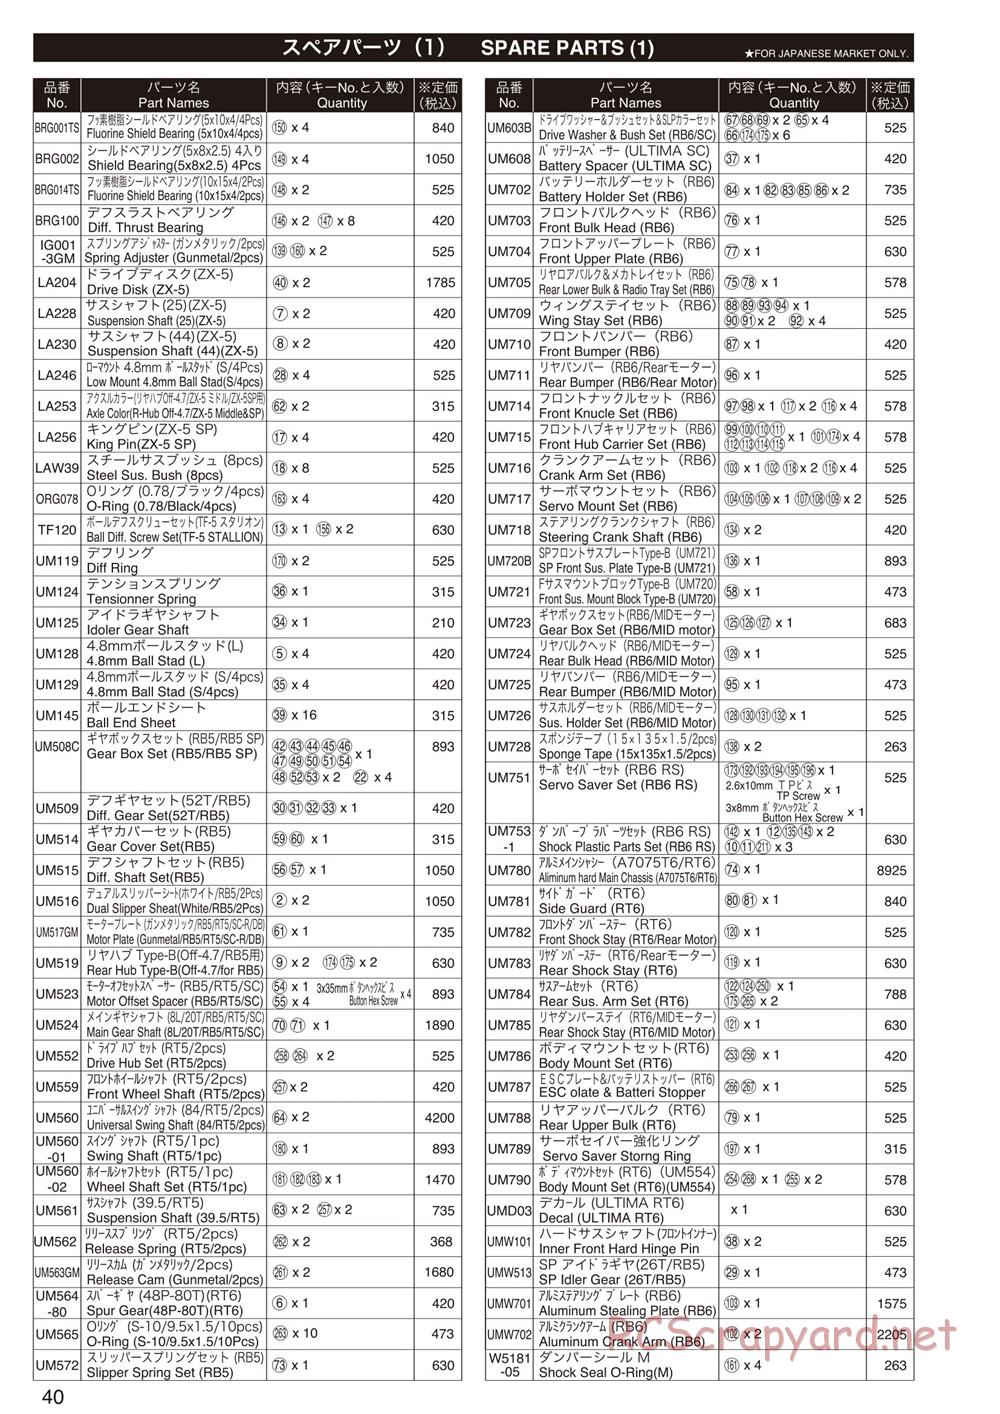 Kyosho - Ultima RT6 - Parts List - Page 1